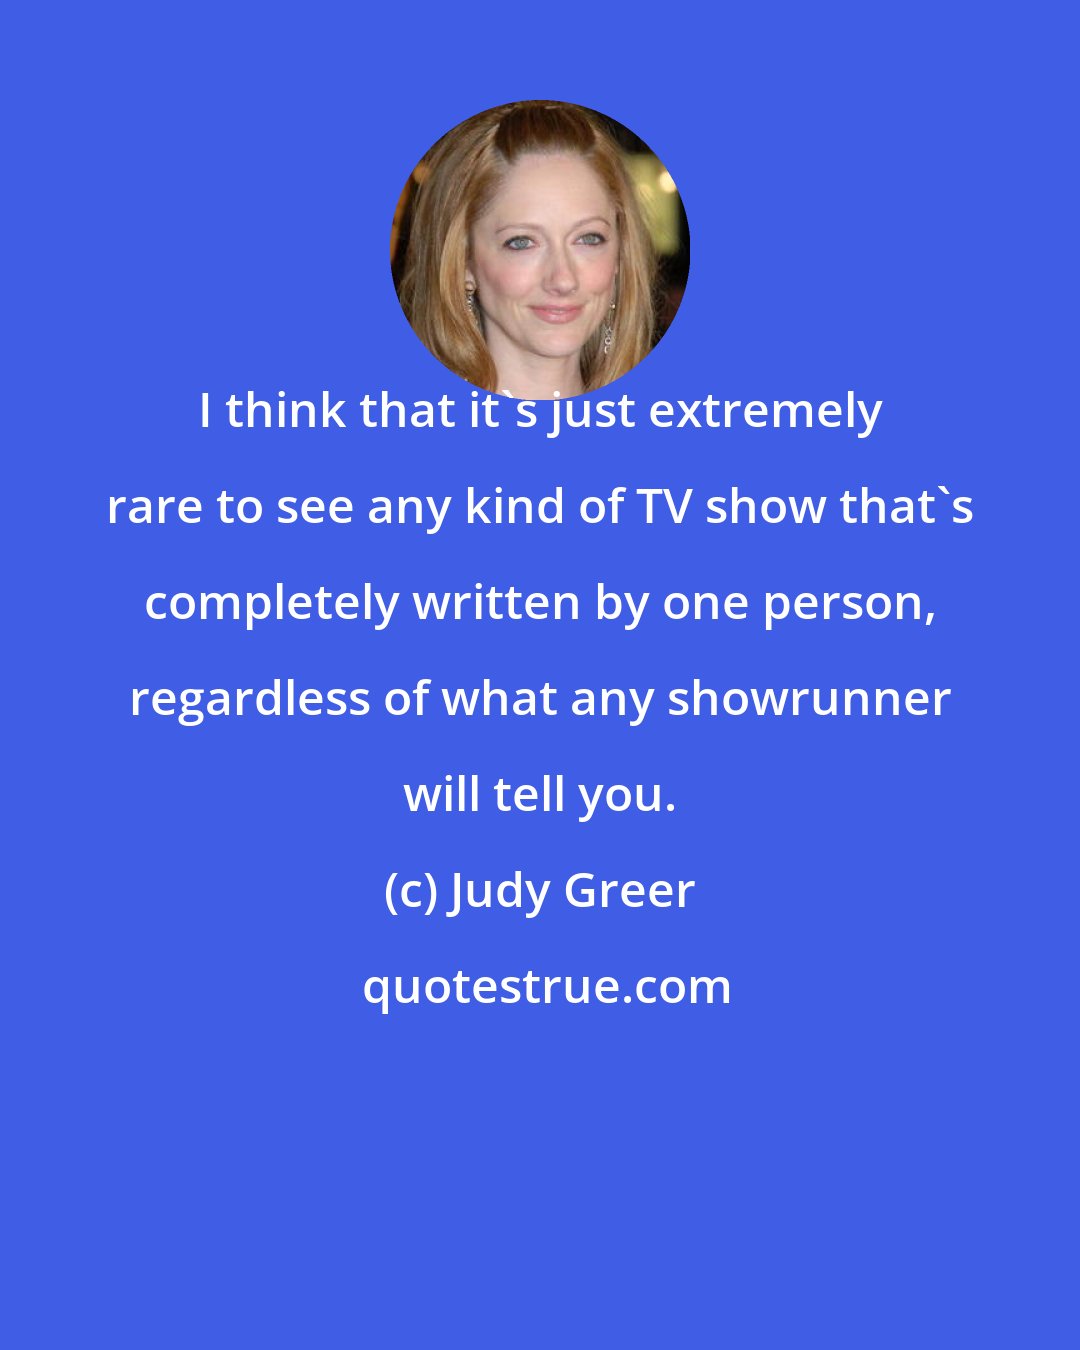 Judy Greer: I think that it's just extremely rare to see any kind of TV show that's completely written by one person, regardless of what any showrunner will tell you.